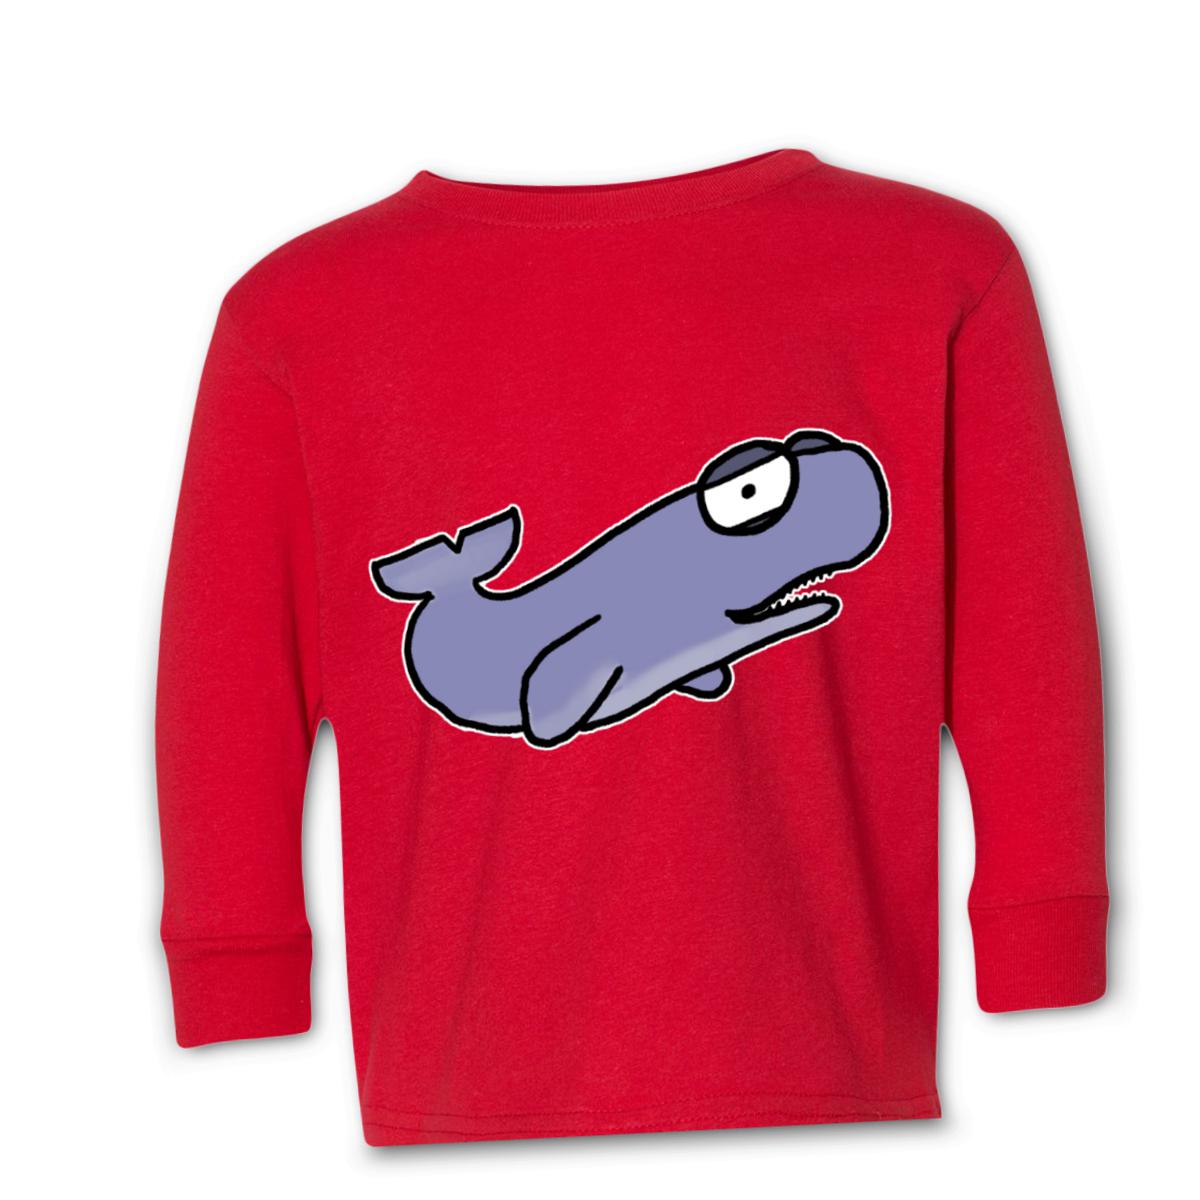 Sperm Whale Toddler Long Sleeve Tee 2T red